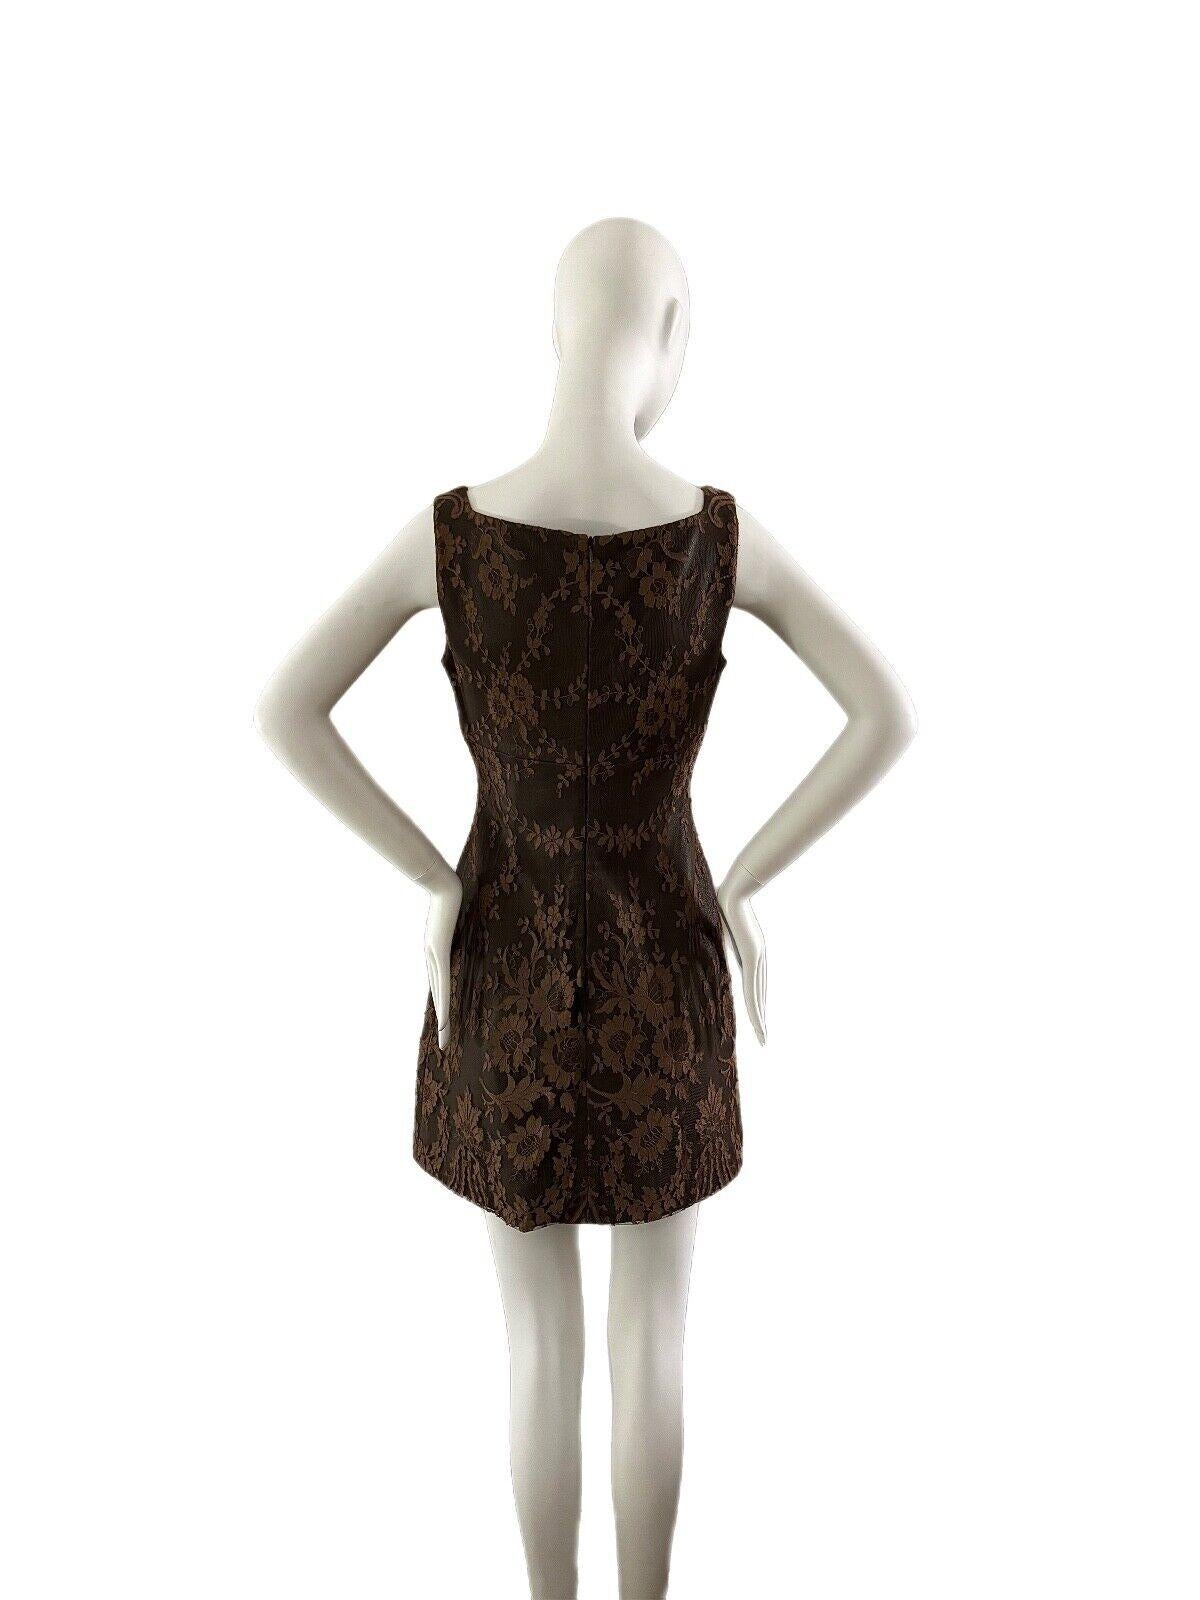 GIANNI VERSACE 1996 vintage leather and lace brown mini dress In Excellent Condition For Sale In Leonardo, NJ